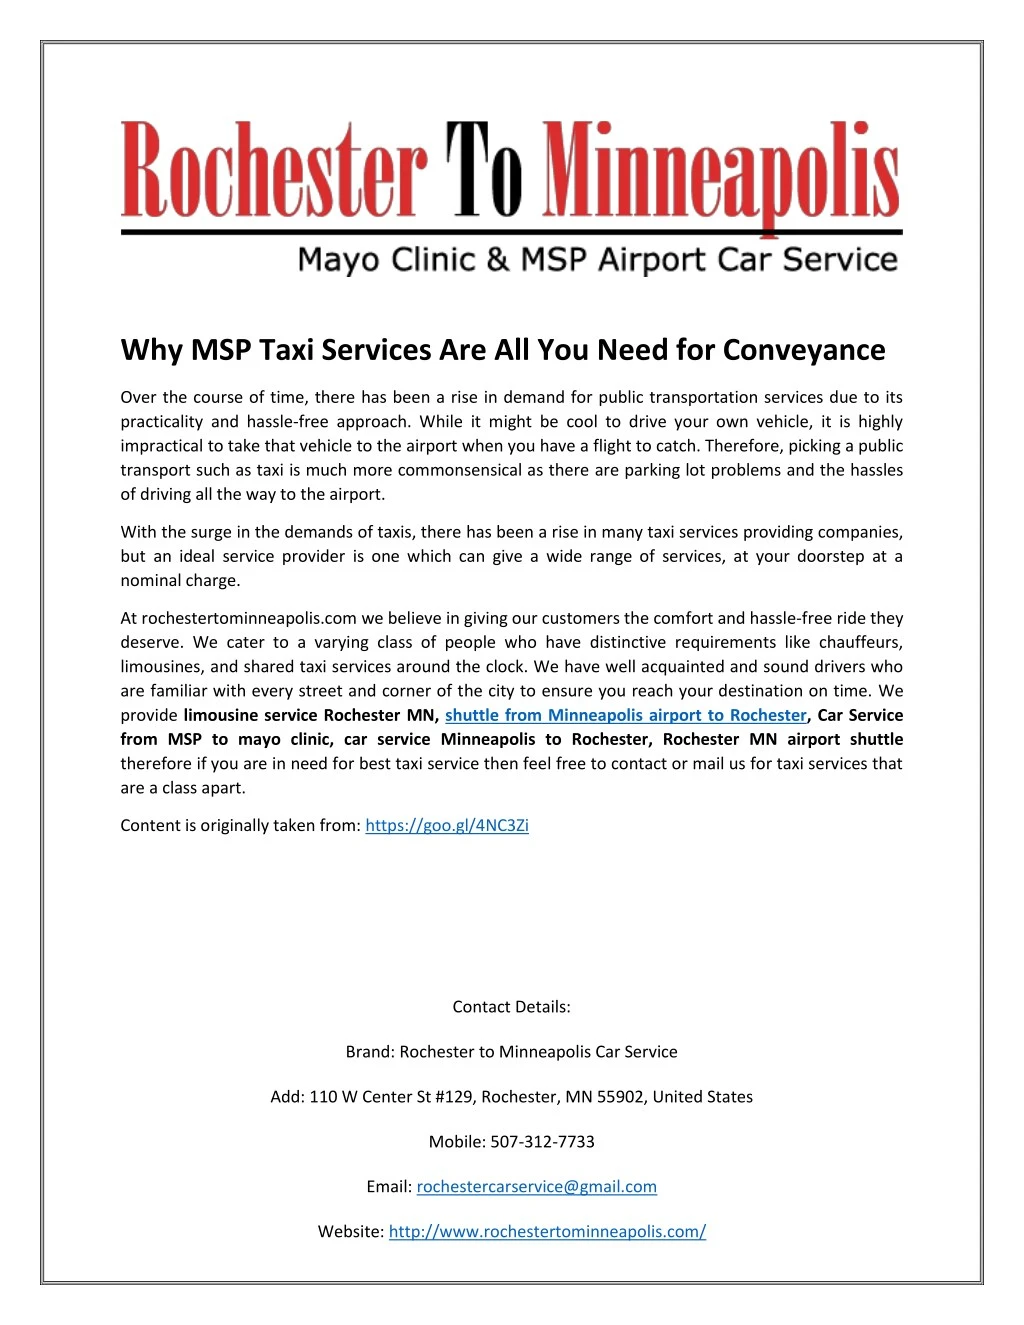 why msp taxi services are all you need